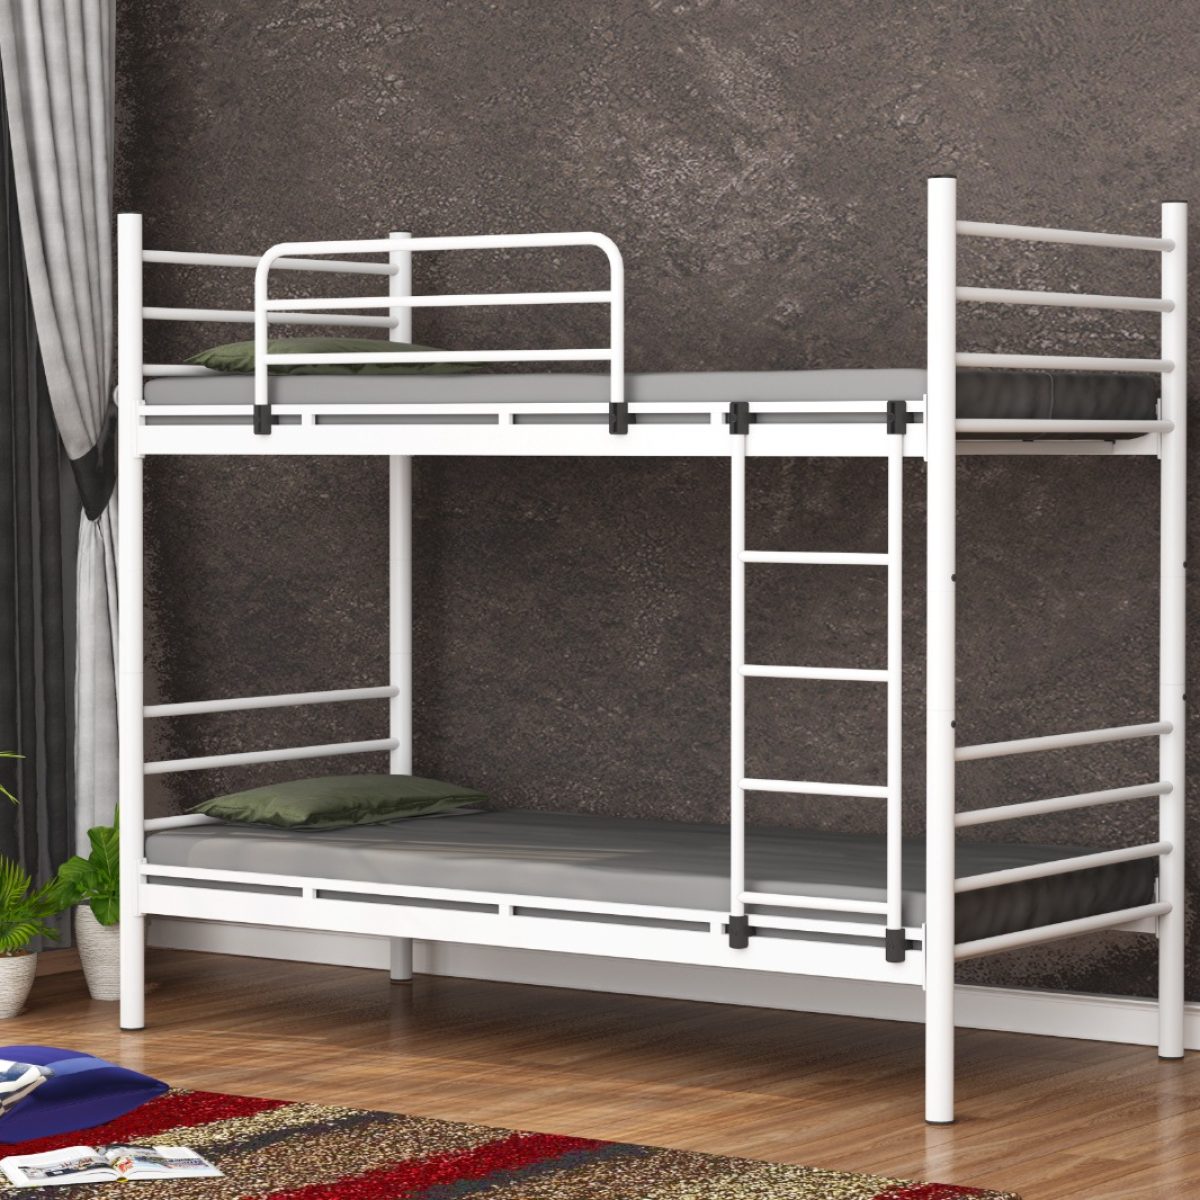 How to Choose the Right Bunk Bed Manufacturer for Your Needs